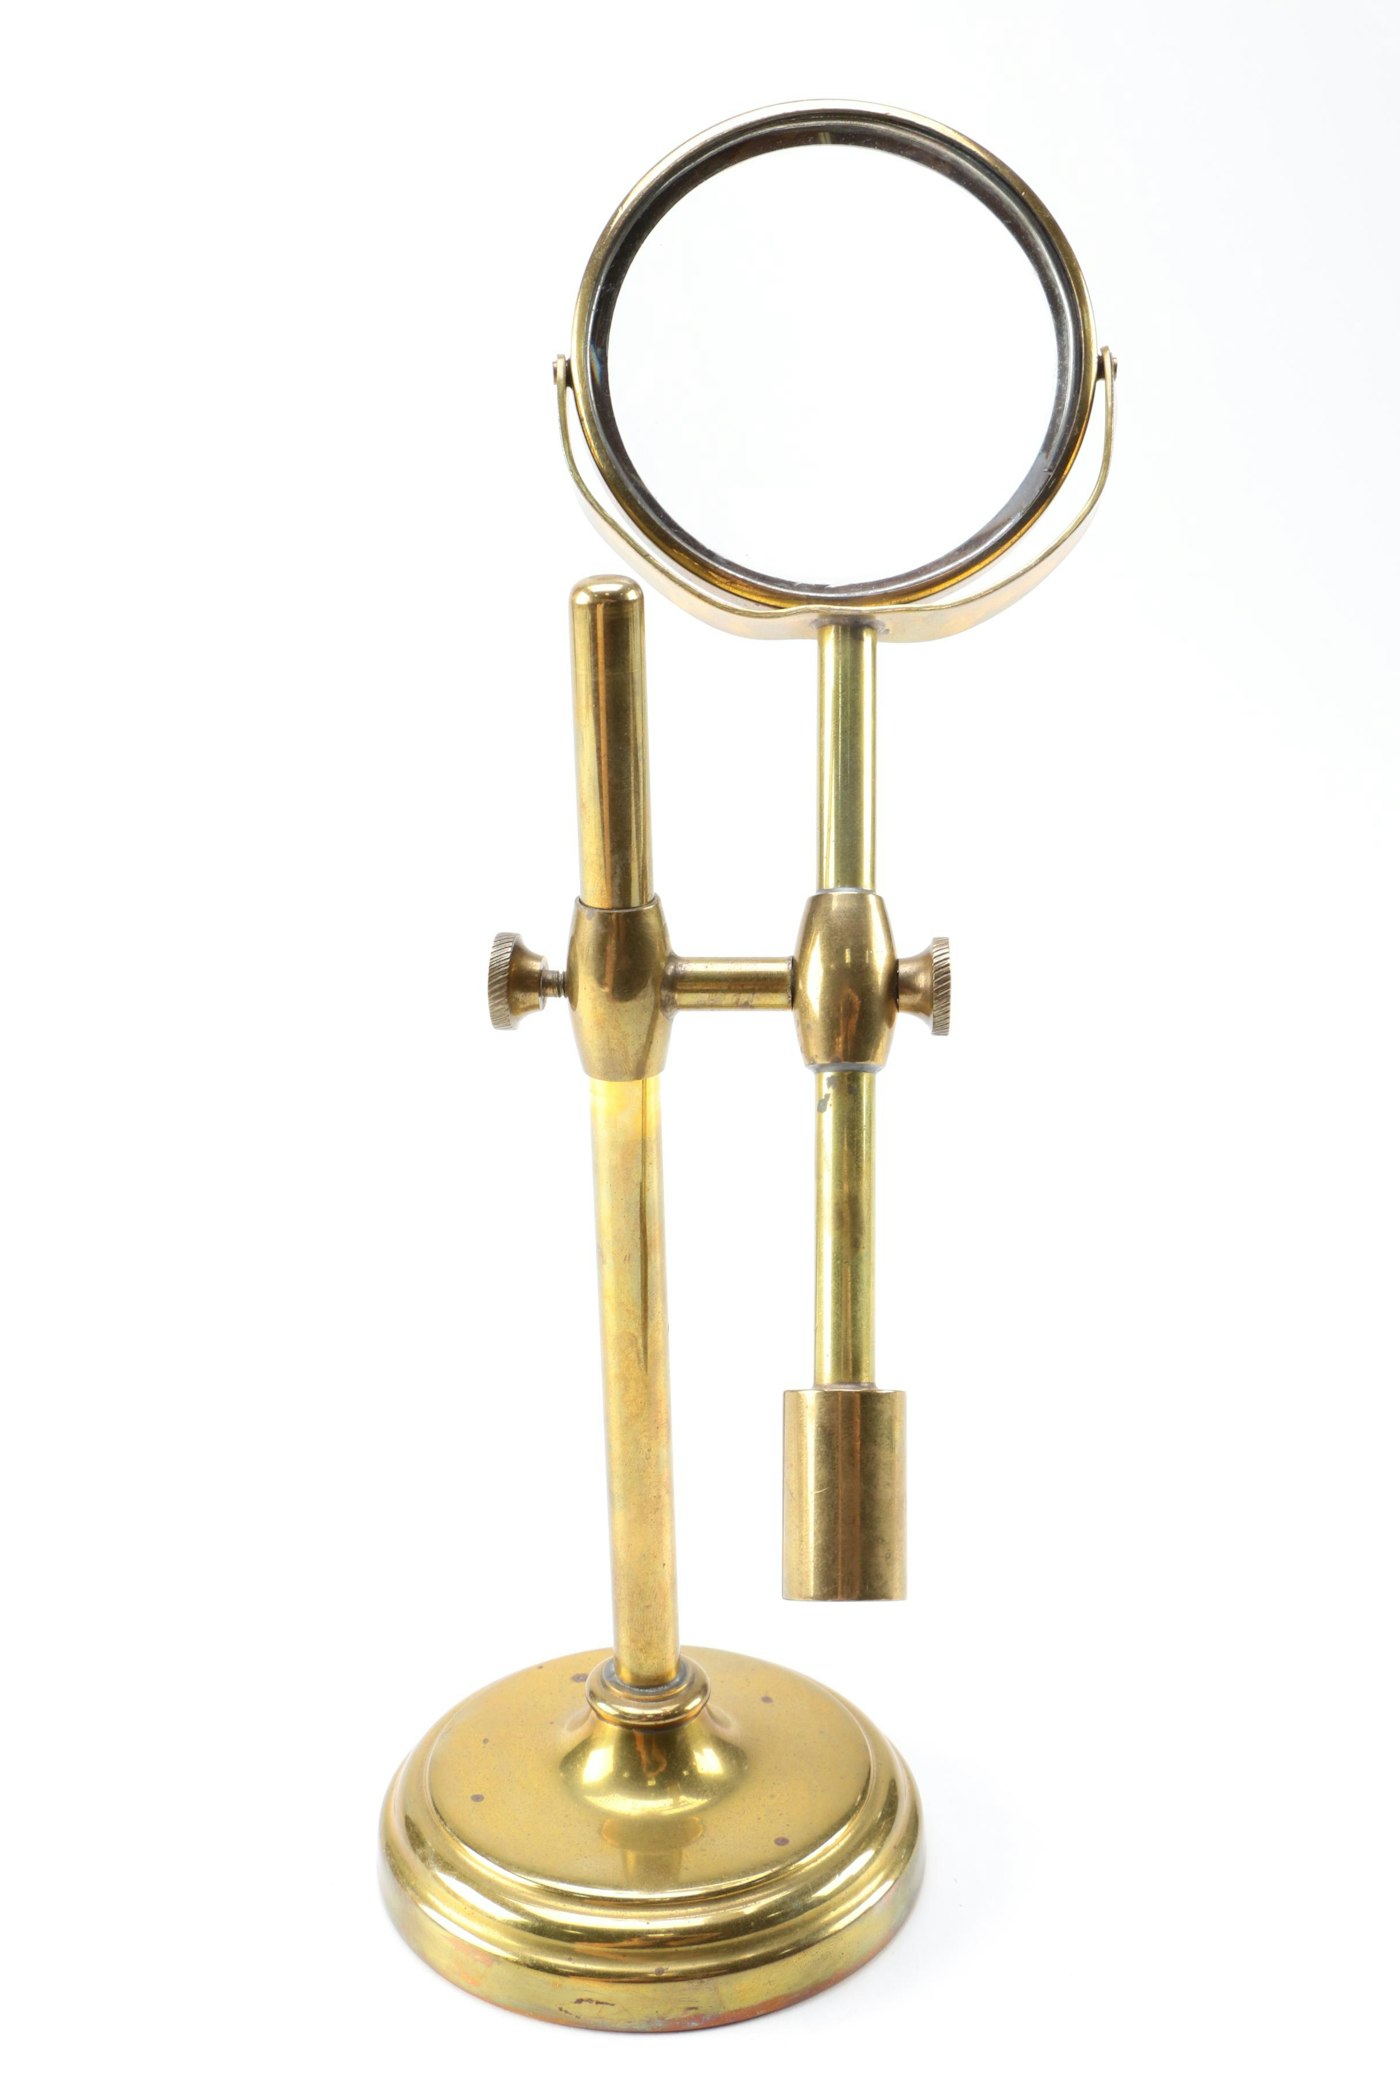 Vintage Brass Magnifying Glass With Stand Ebth